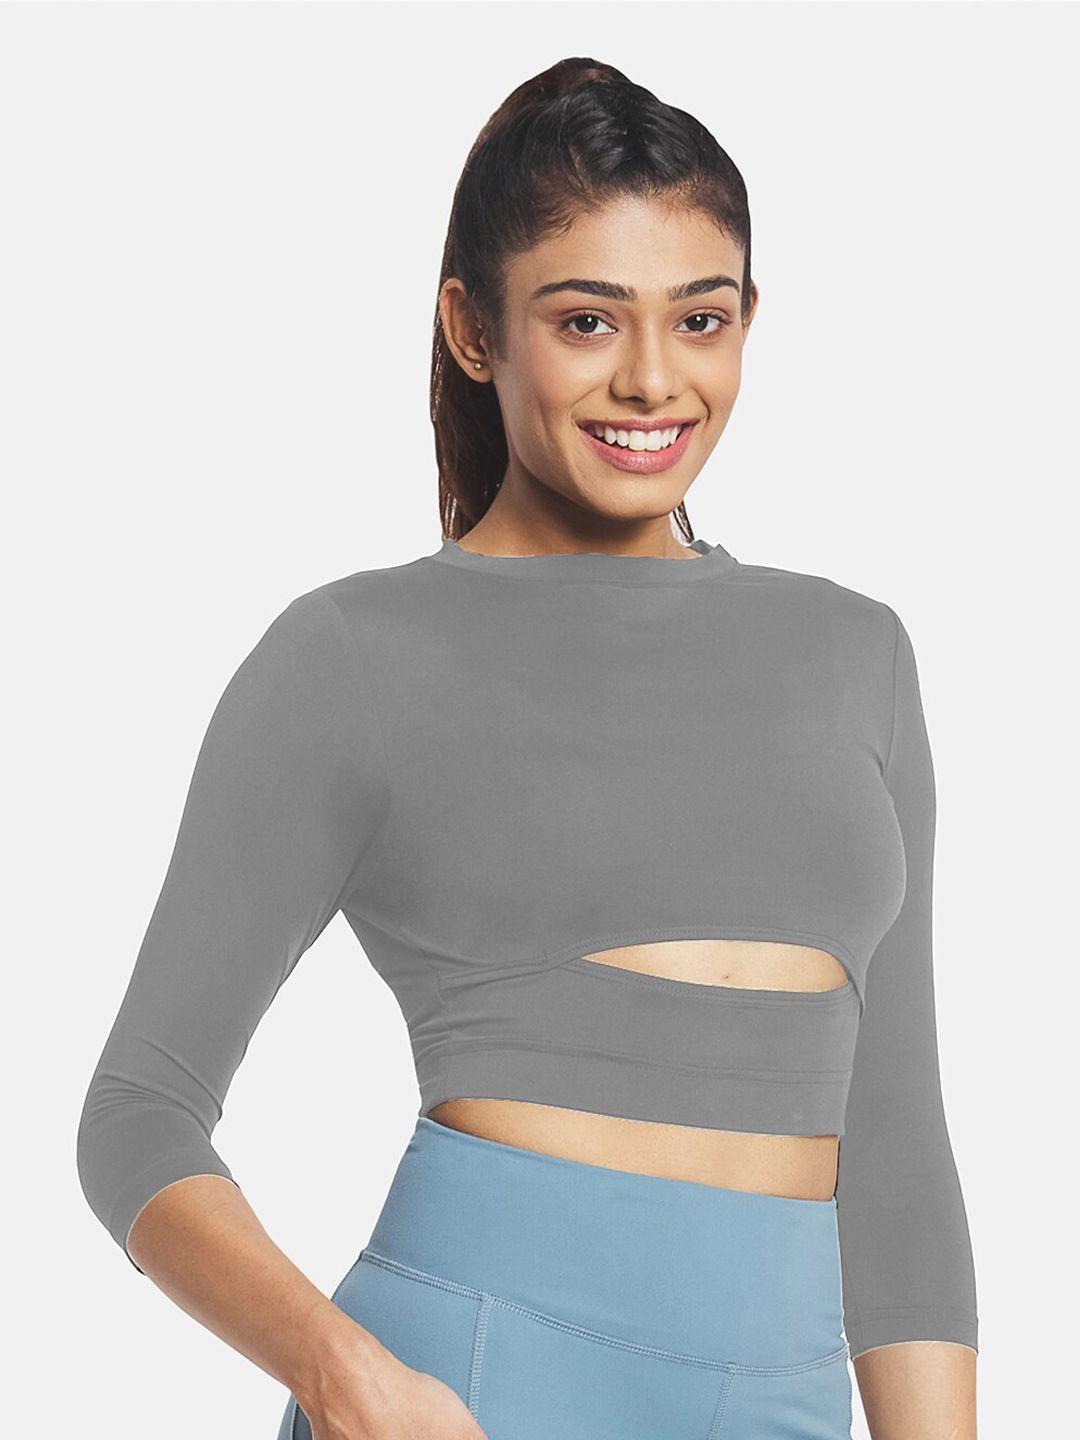 kica cut outs long sleeves crop top